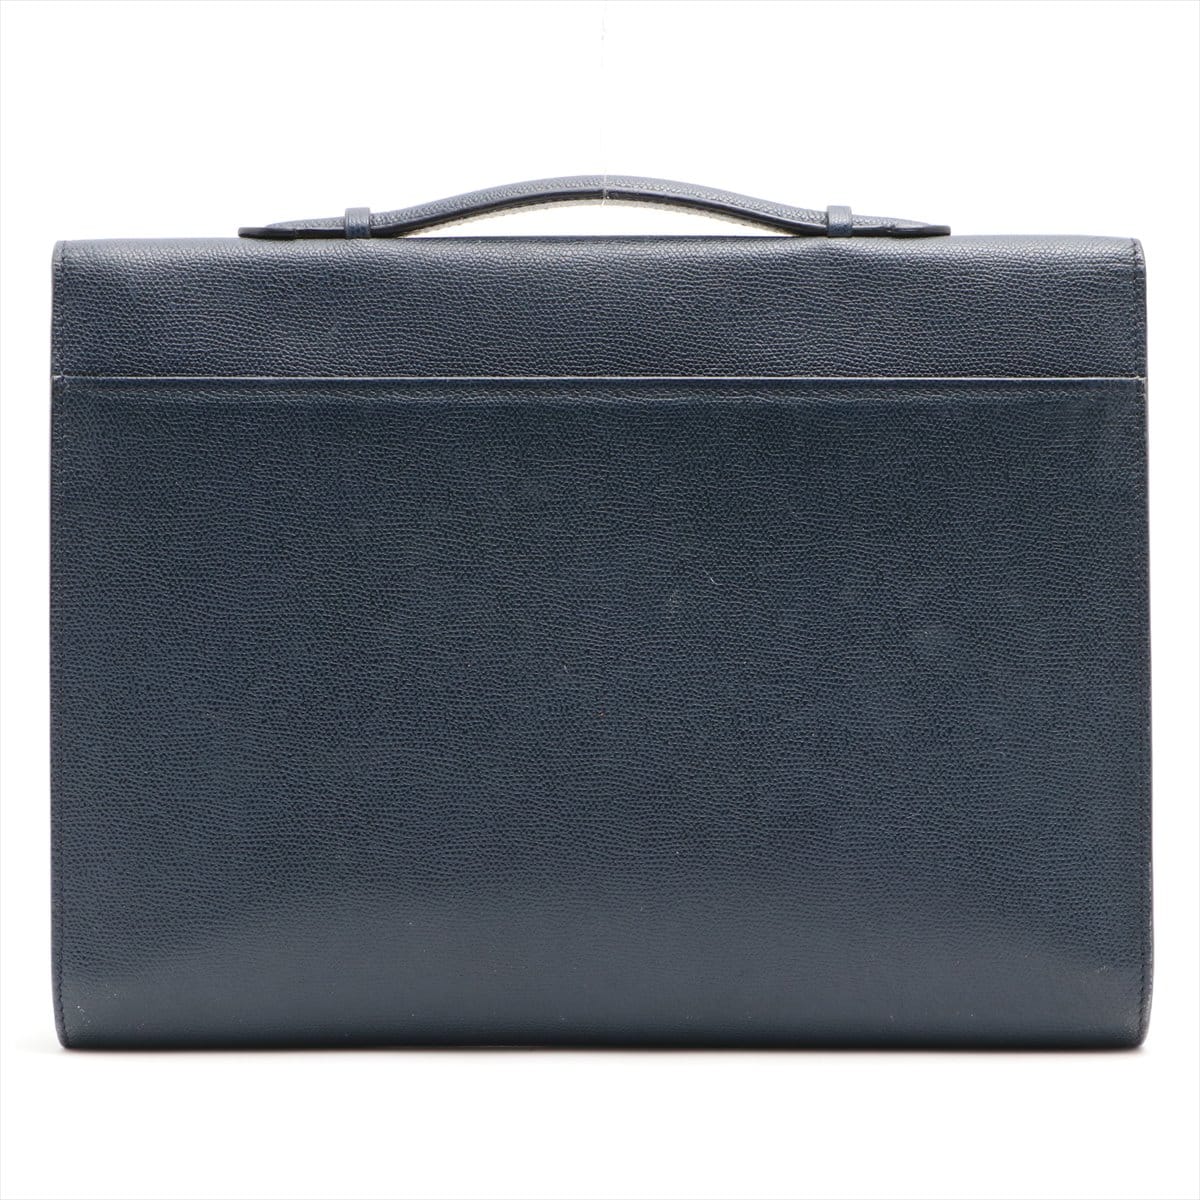 Valextra Leather Business bag Navy blue With a key